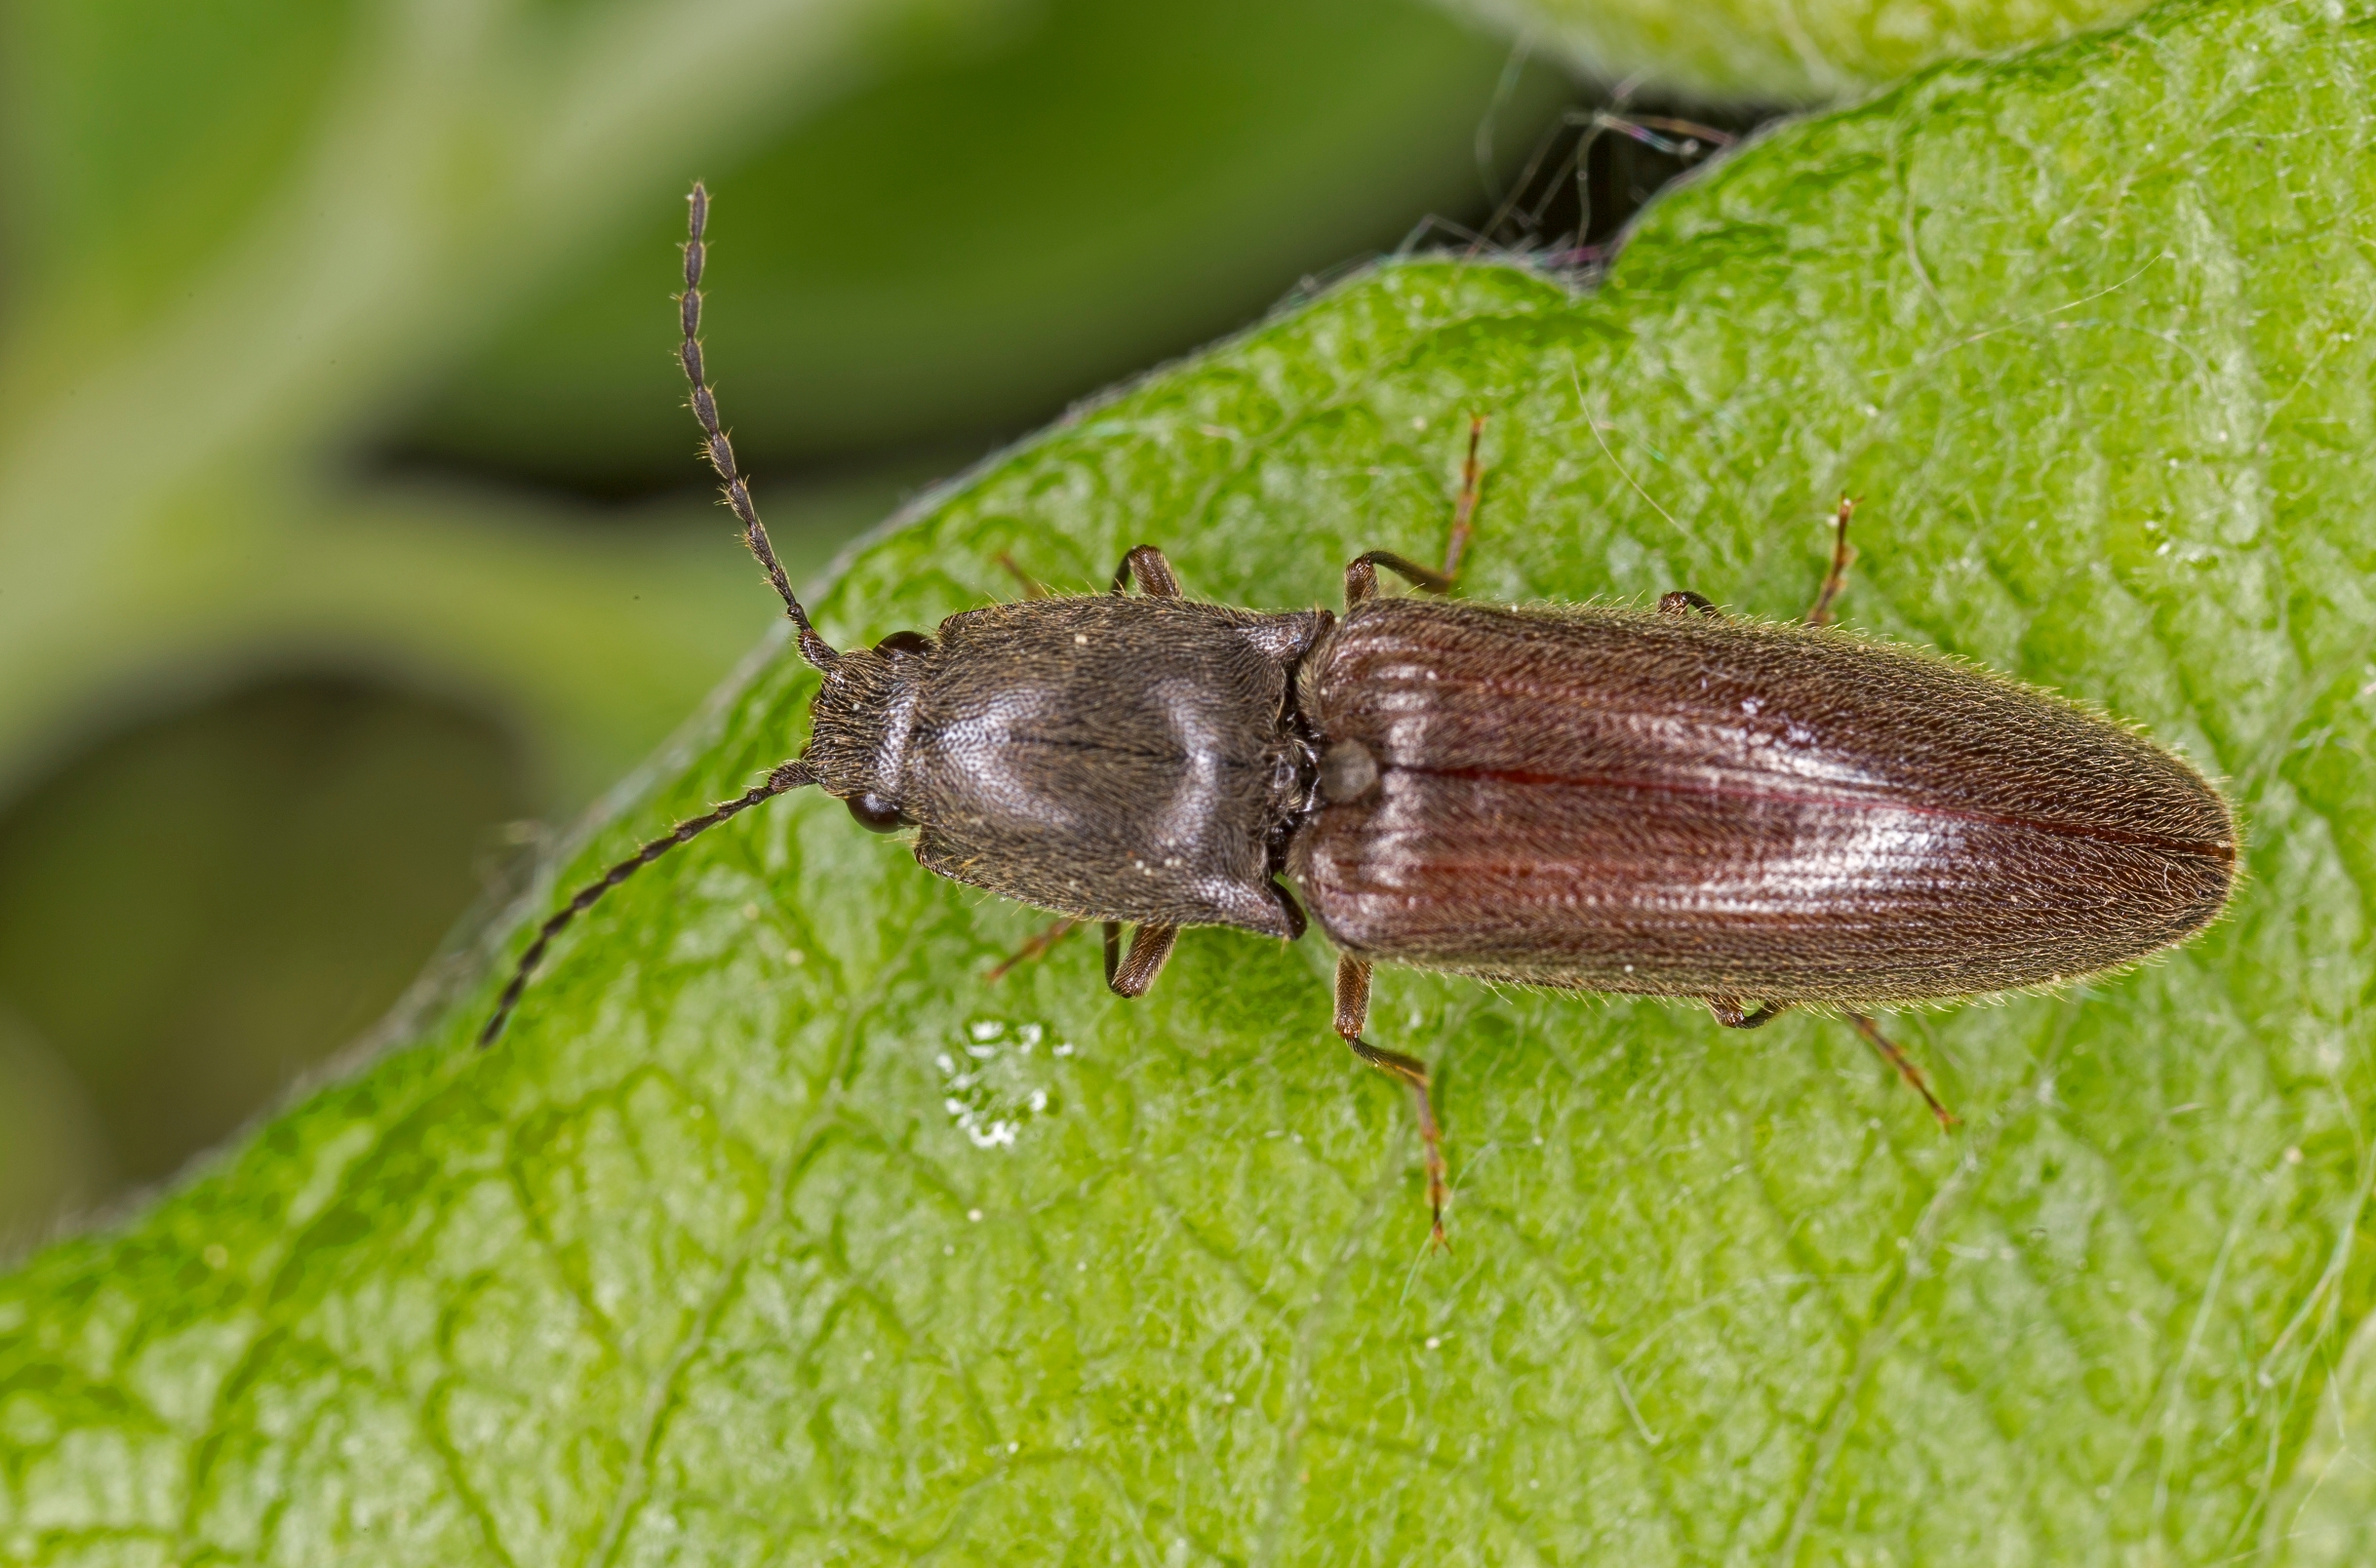 An adult click beetle